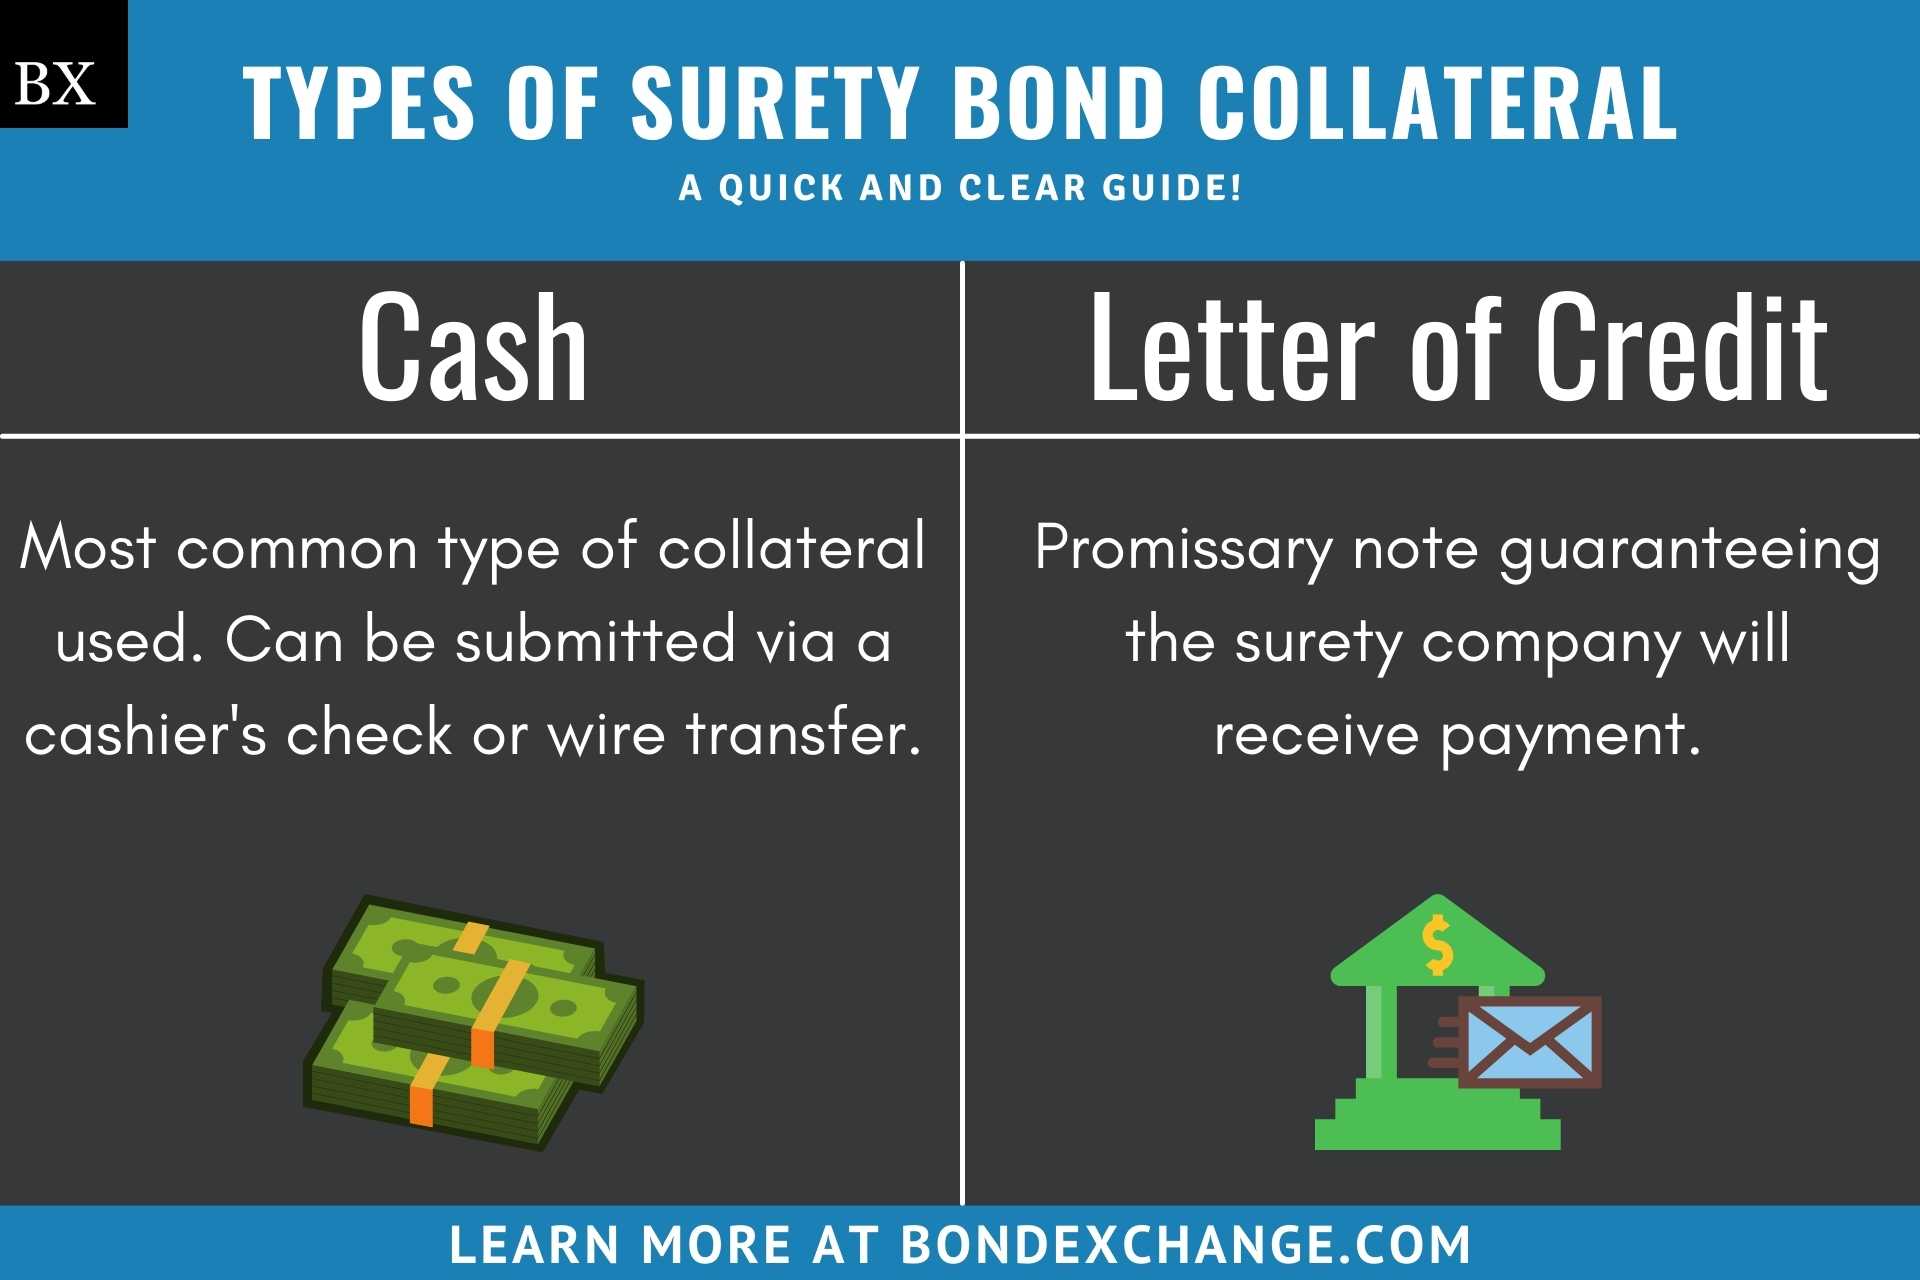 Surety Bond: What Is It? — Insurance Agent's Guide to Surety